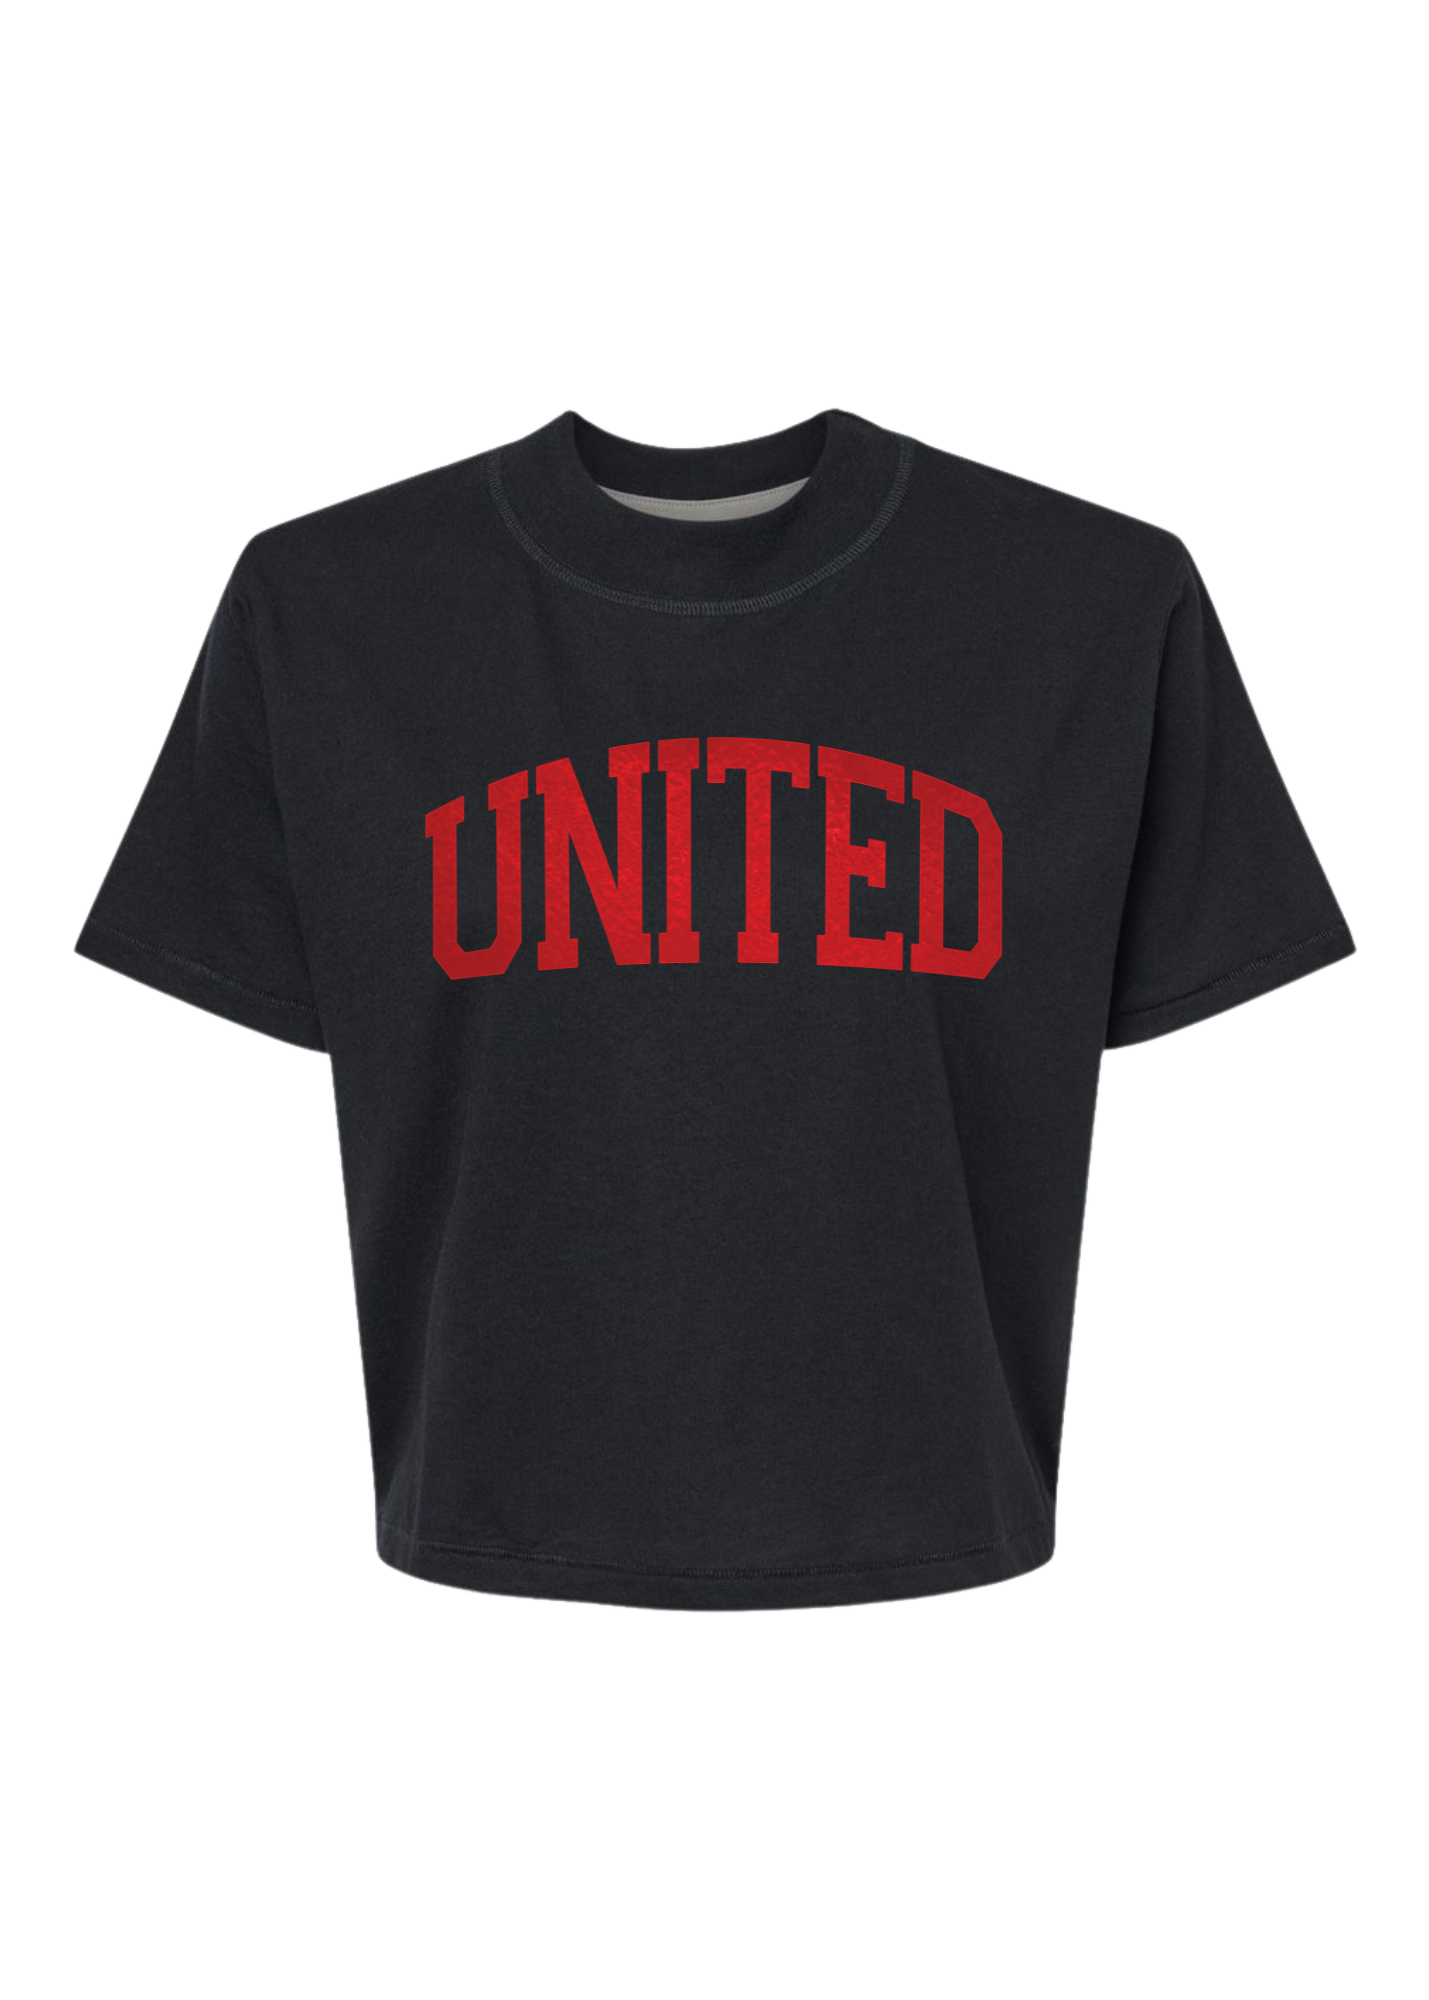 United Foil | Mom Crop Tee-Sister Shirts-Sister Shirts, Cute & Custom Tees for Mama & Littles in Trussville, Alabama.